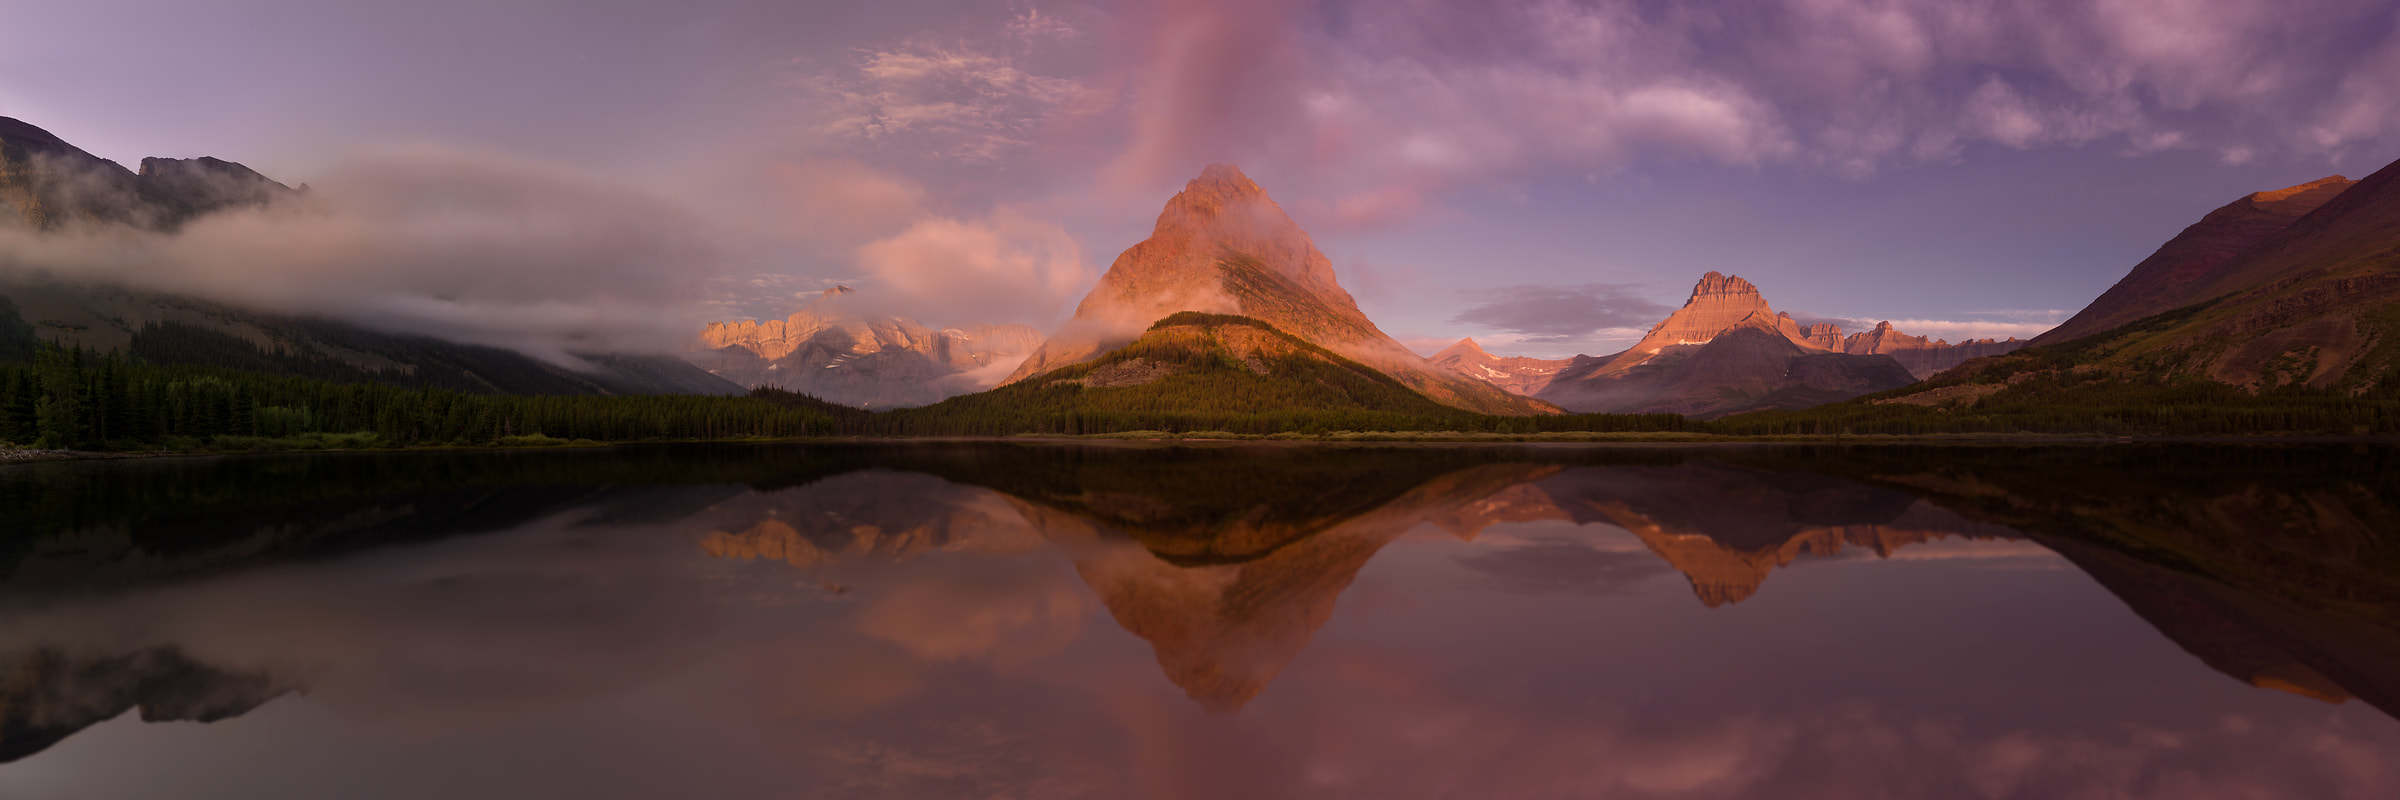 109 megapixels! A very high resolution, large-format VAST photo print of Swiftcurrent Lake in Glacier National Park, Montana; nature landscape photo created by Guido Brandt.